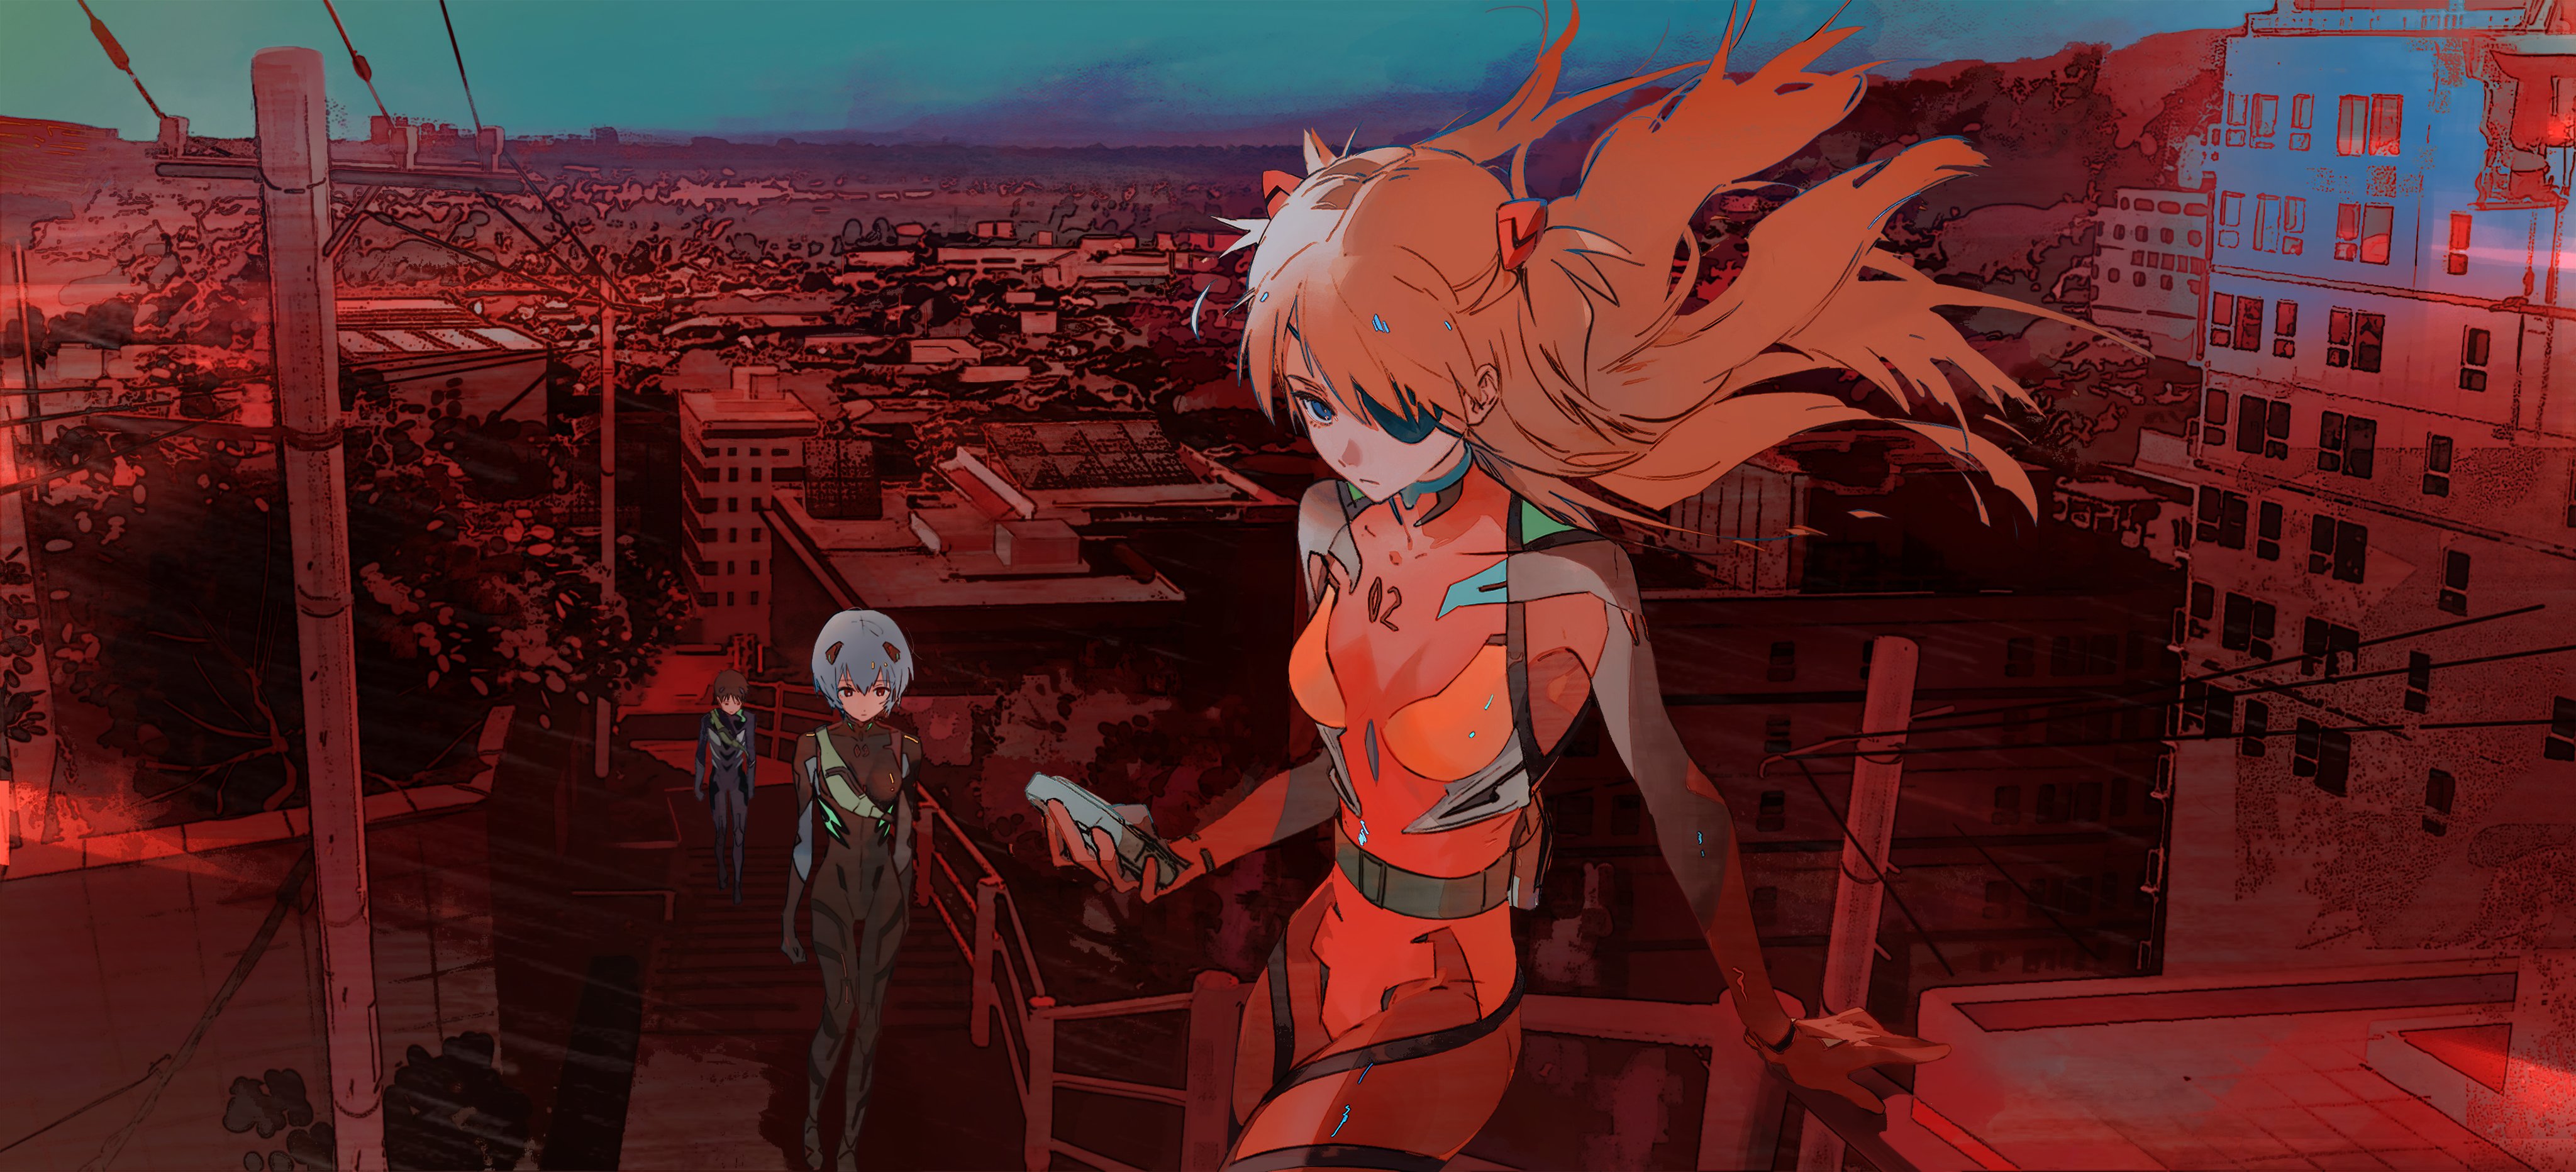 Anime Evangelion: 3.0+1.0 Thrice Upon a Time HD Wallpaper | Background Image